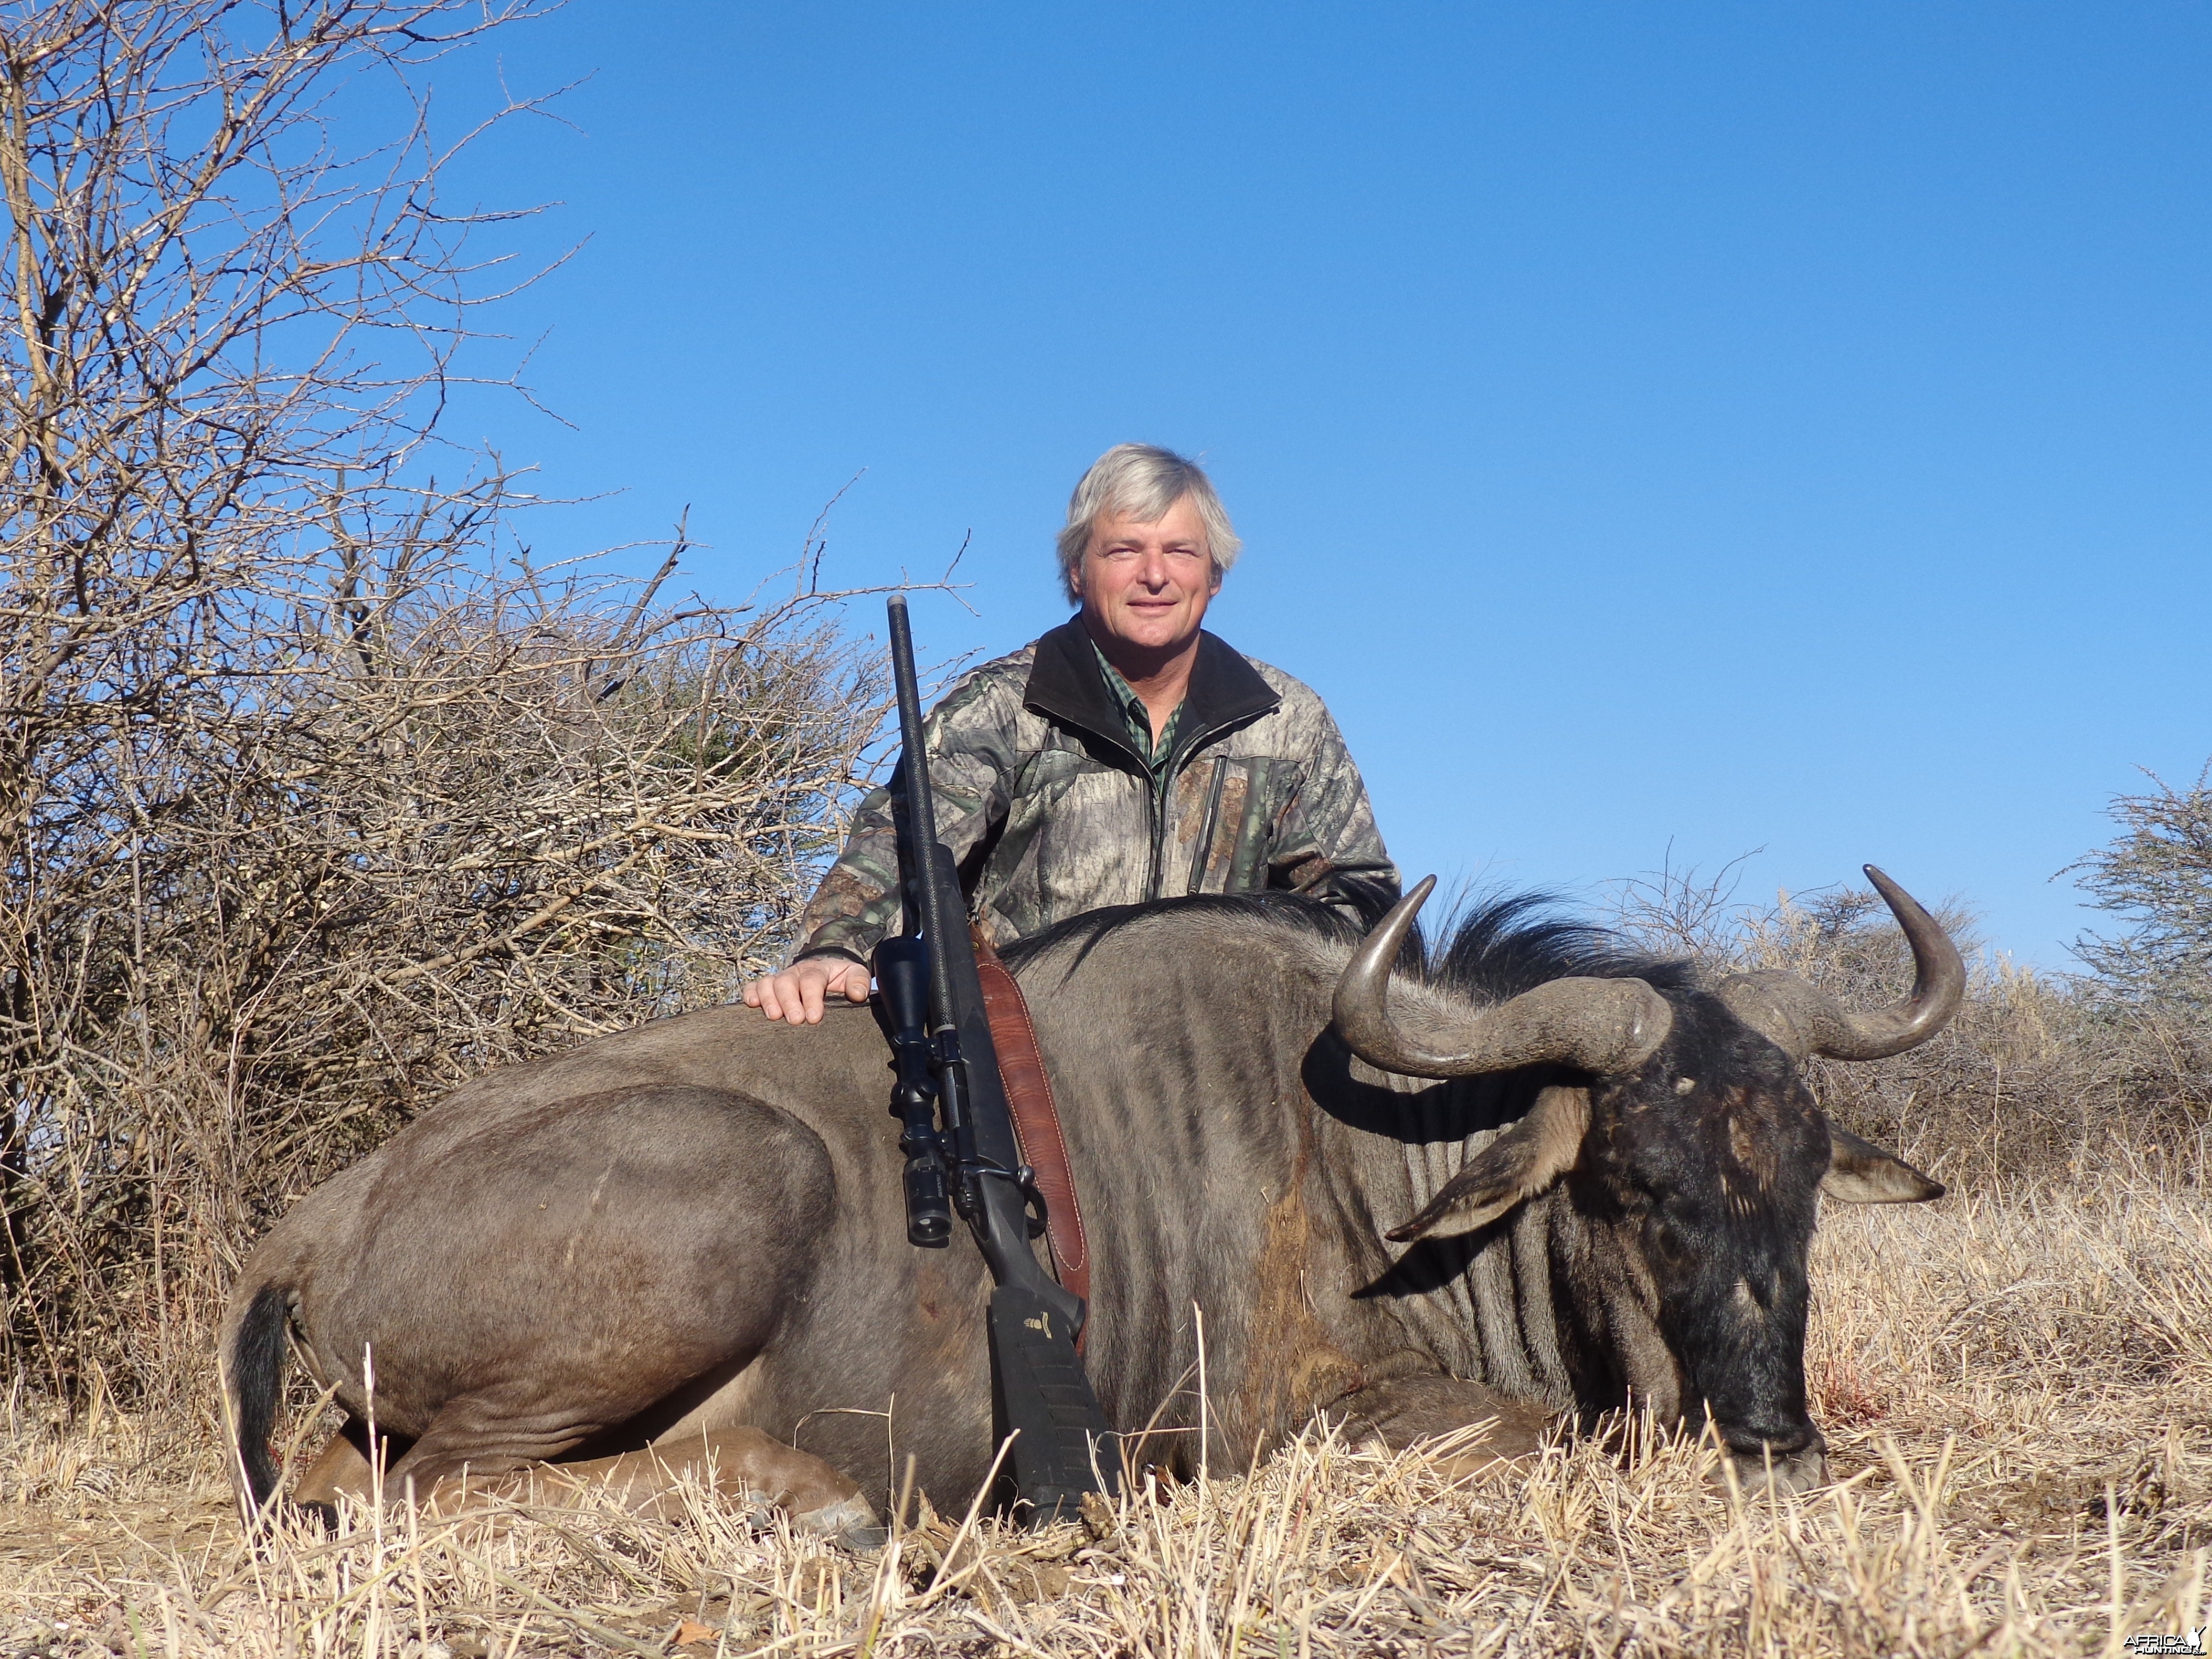 Blue Wildebeest hunted with Ozondjahe Hunting Safaris in Namibia